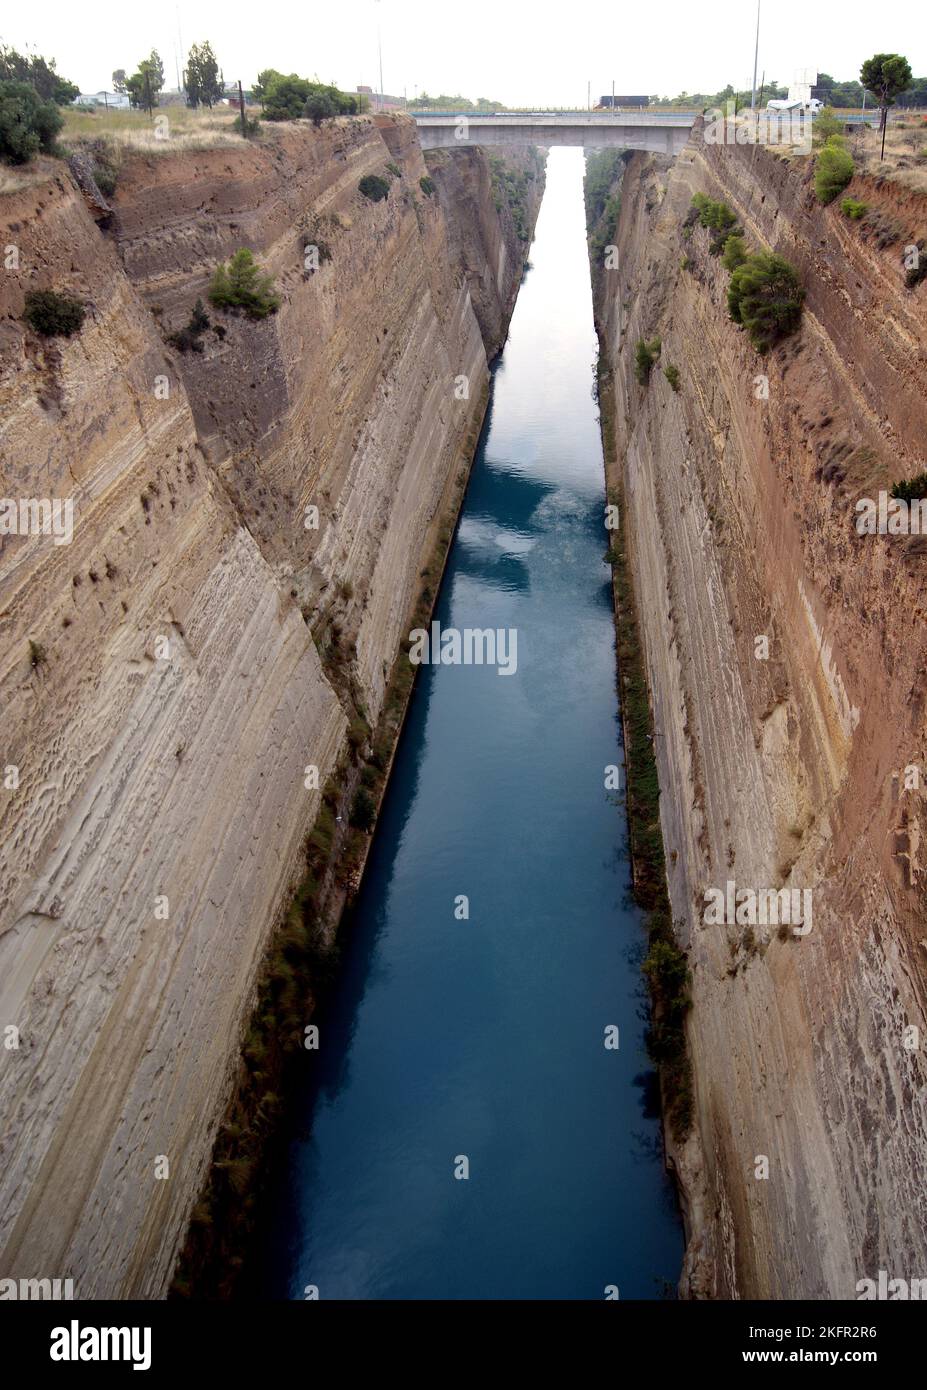 Corinth Canal, completed in 1893, connecting the Gulf of Corinth of the Ionic Sea with the Saronic Gulf in the Aegean Sea, Greece Stock Photo